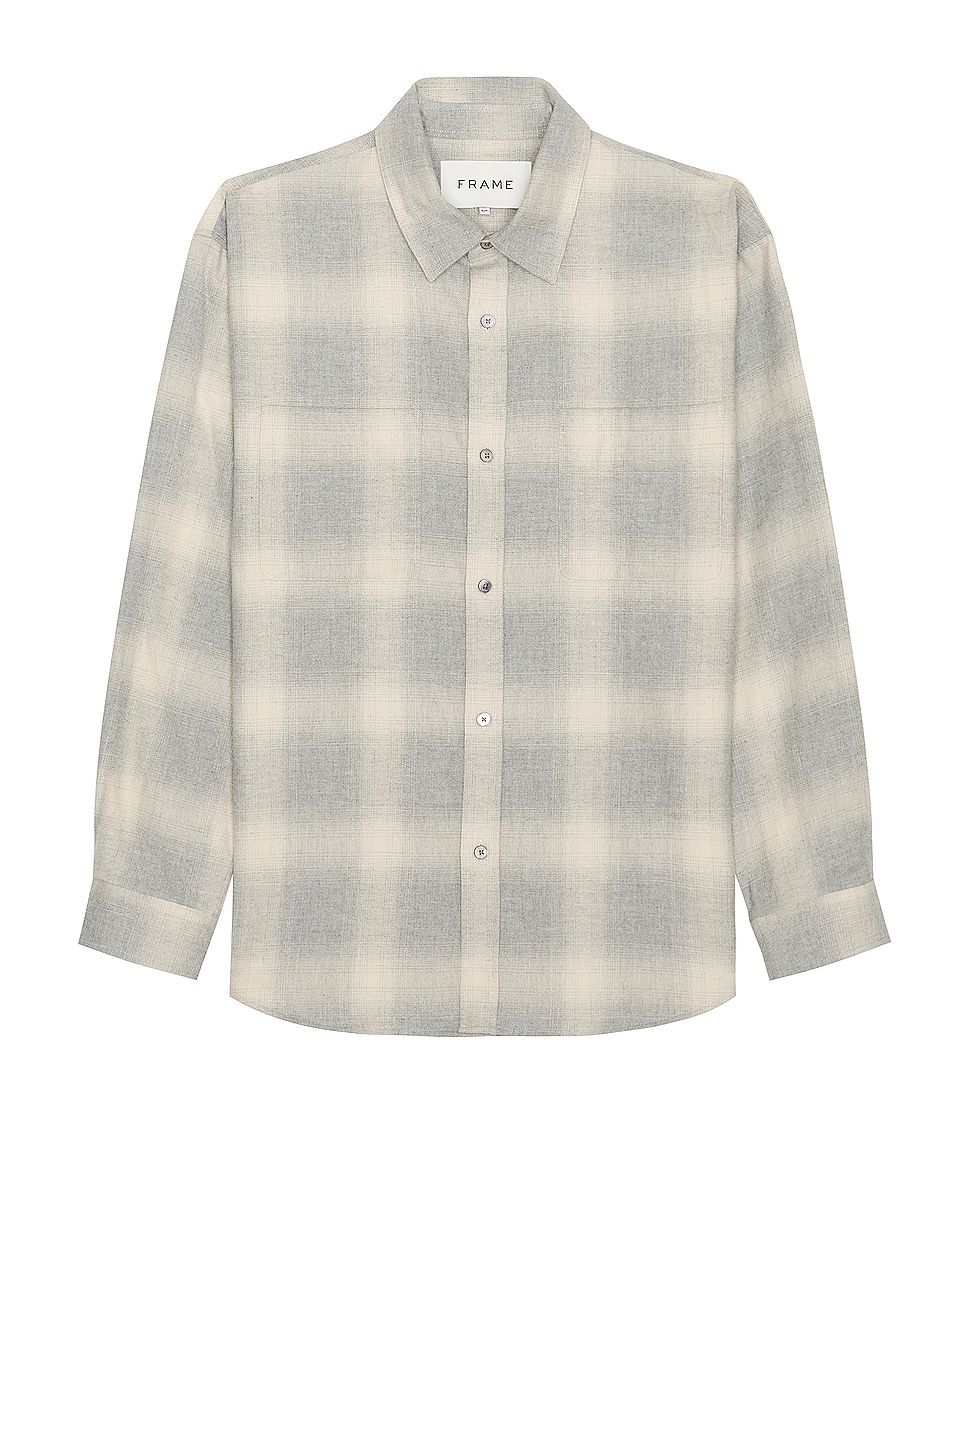 Image 1 of FRAME Flannel Shirt in Grey & Oatmeal Plaid